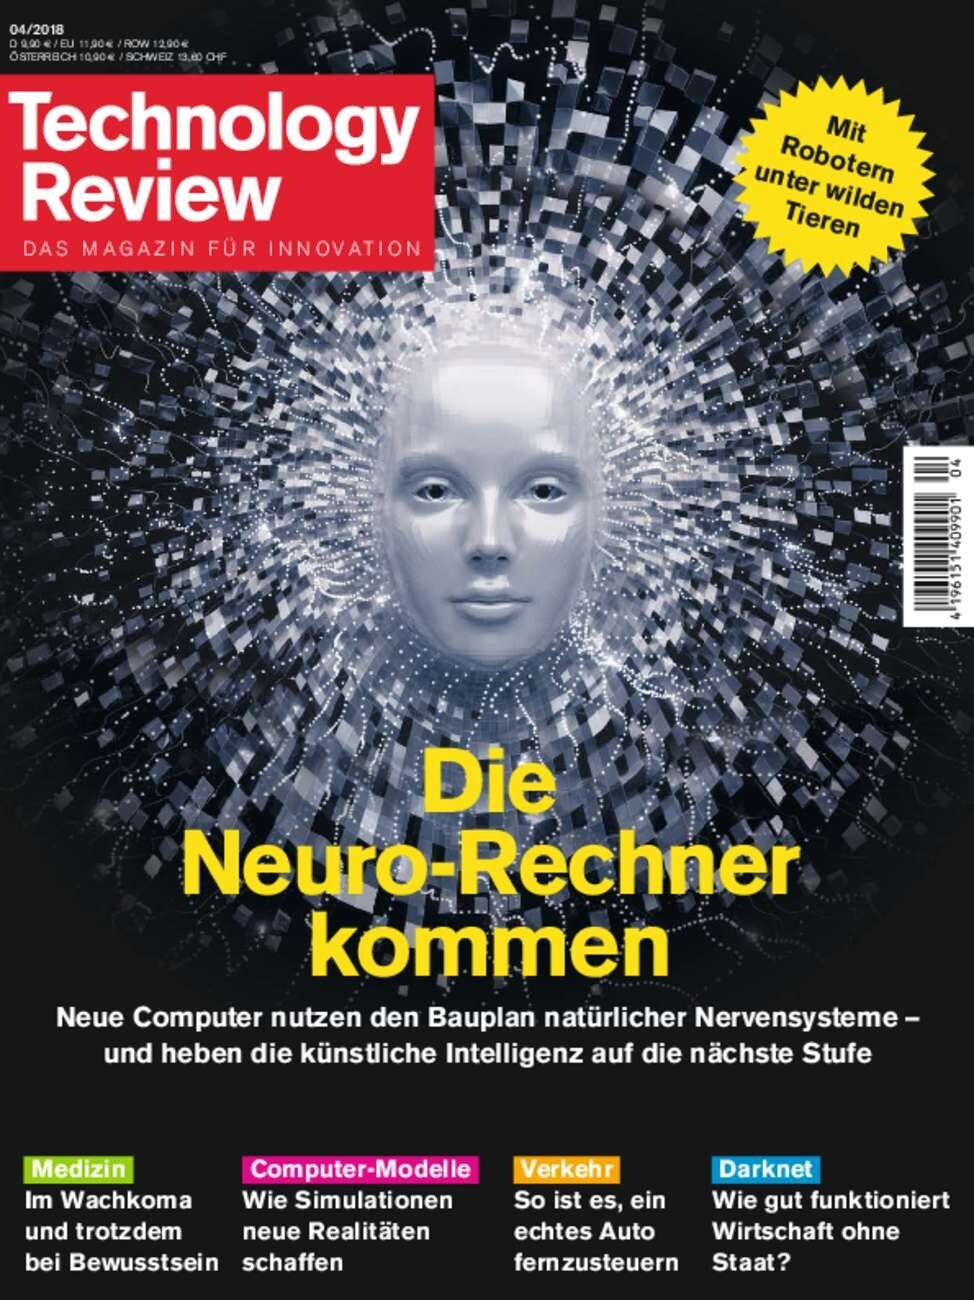 Technology Review 4/2018